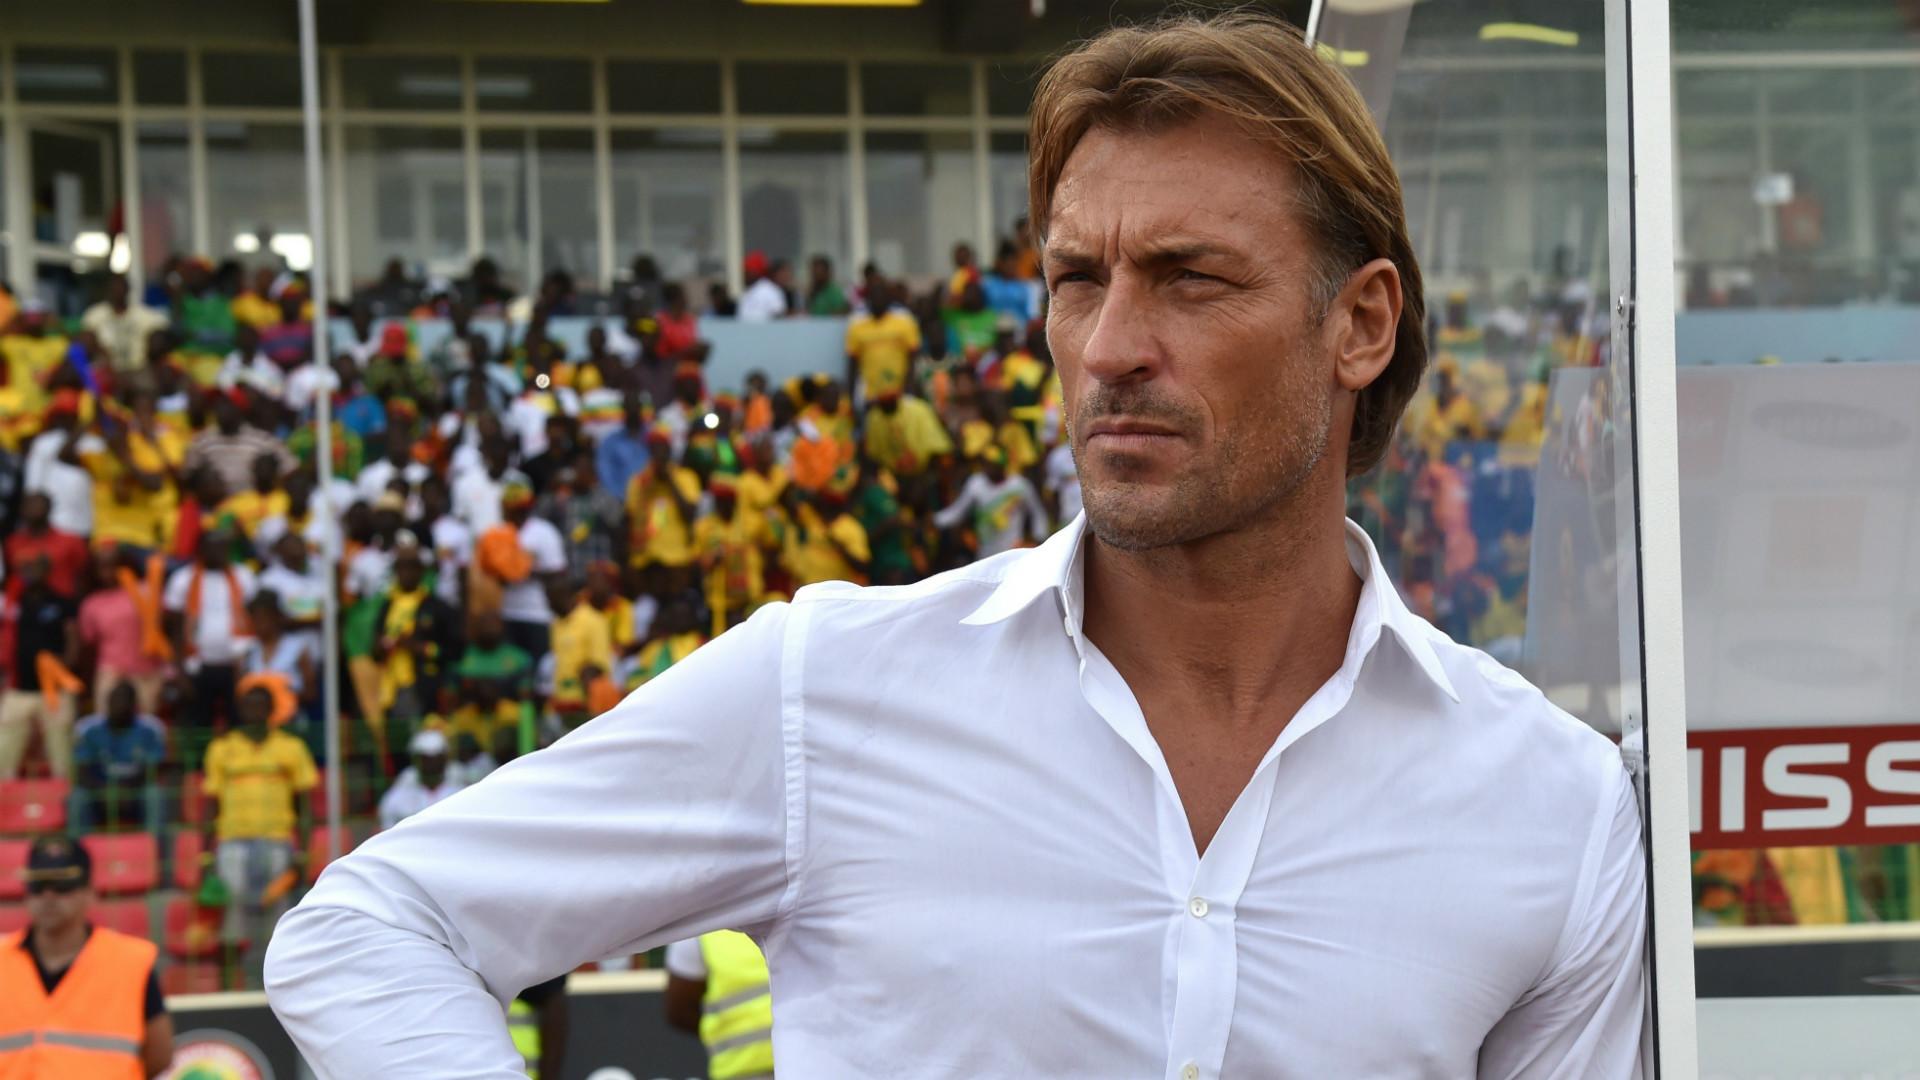 Moroccan football coach Herve Renard wins hearts of World Cup fans